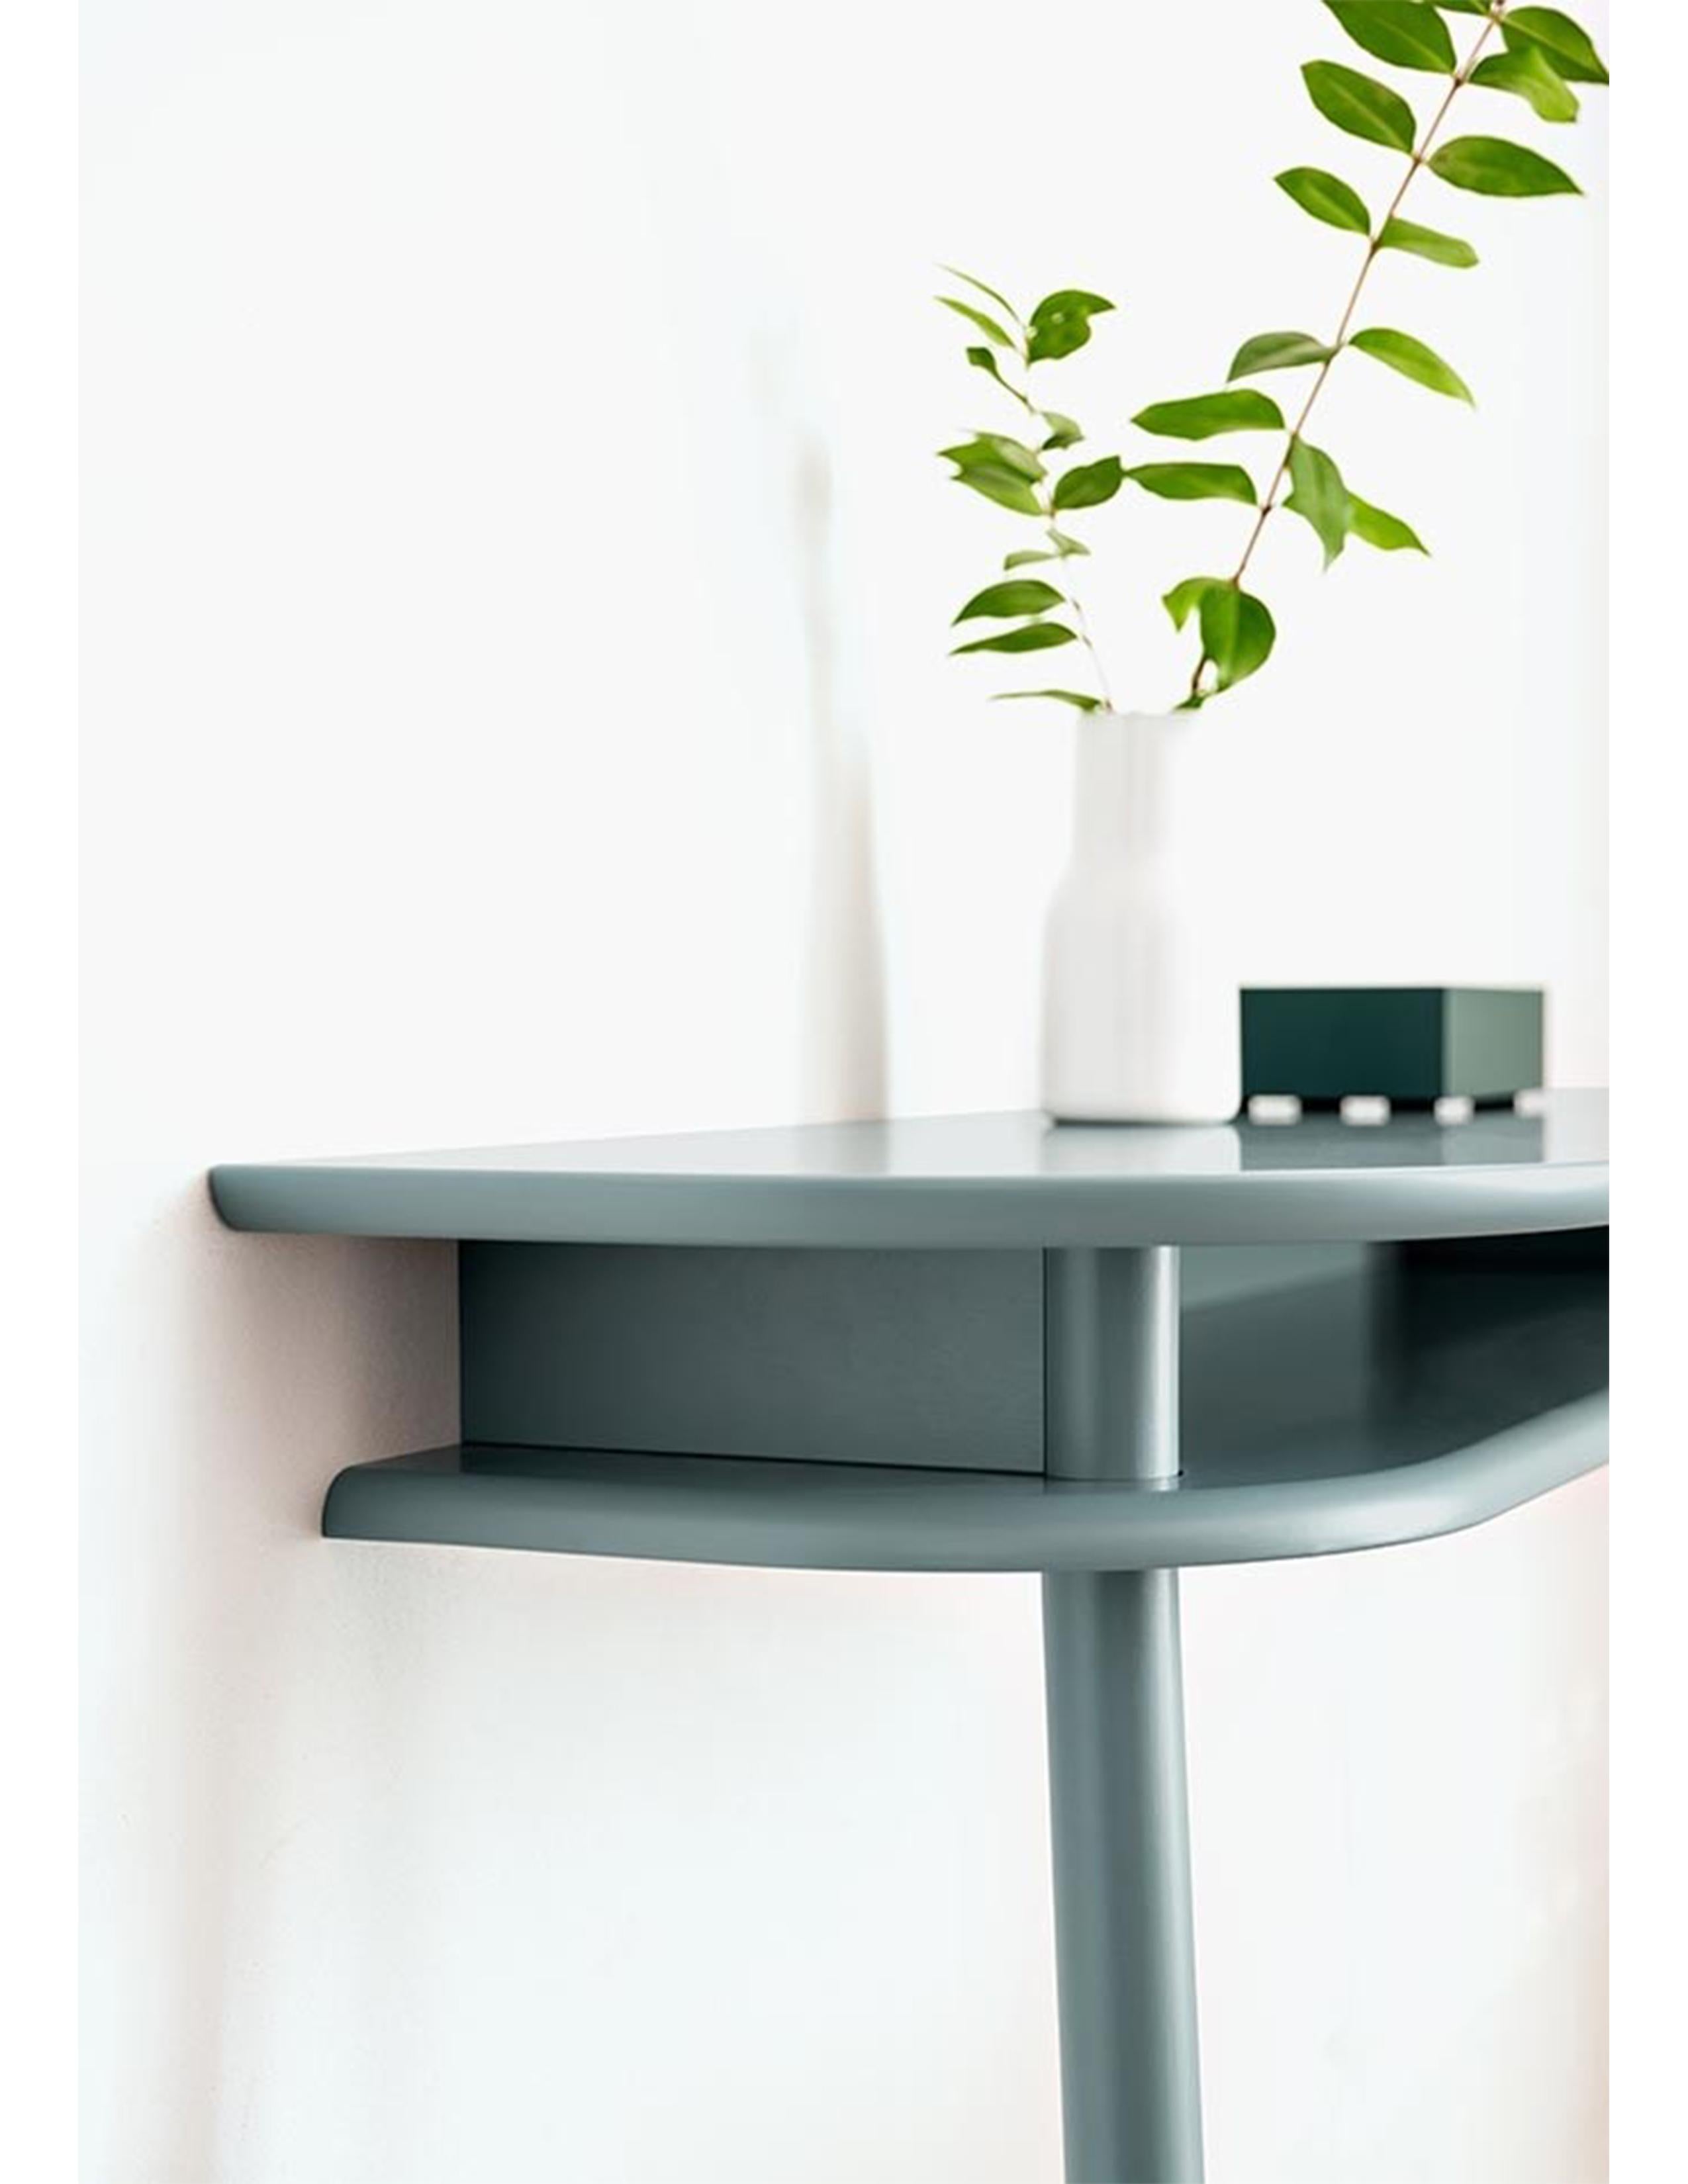 The table from the BUREAU line melds clear modernity with timeless class, its rounded lines being a key design feature. BUREAU is the perfect size for a dining table, but also makes the ideal showcase for creative arrangements of plants or